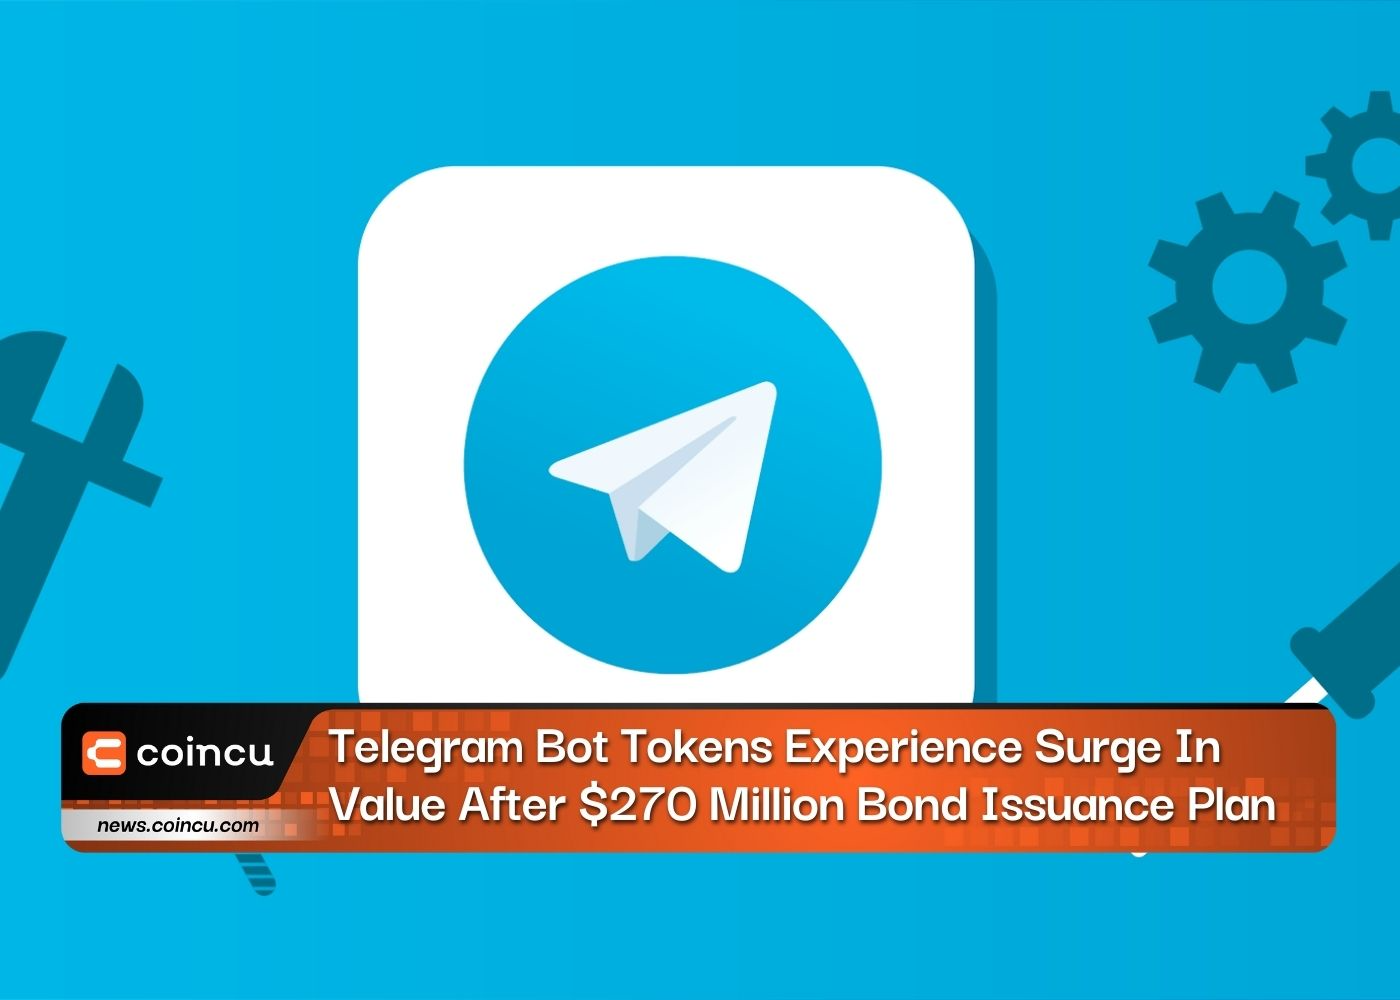 Telegram Bot Tokens Experience Surge In Value After $270 Million Bond Issuance Plan